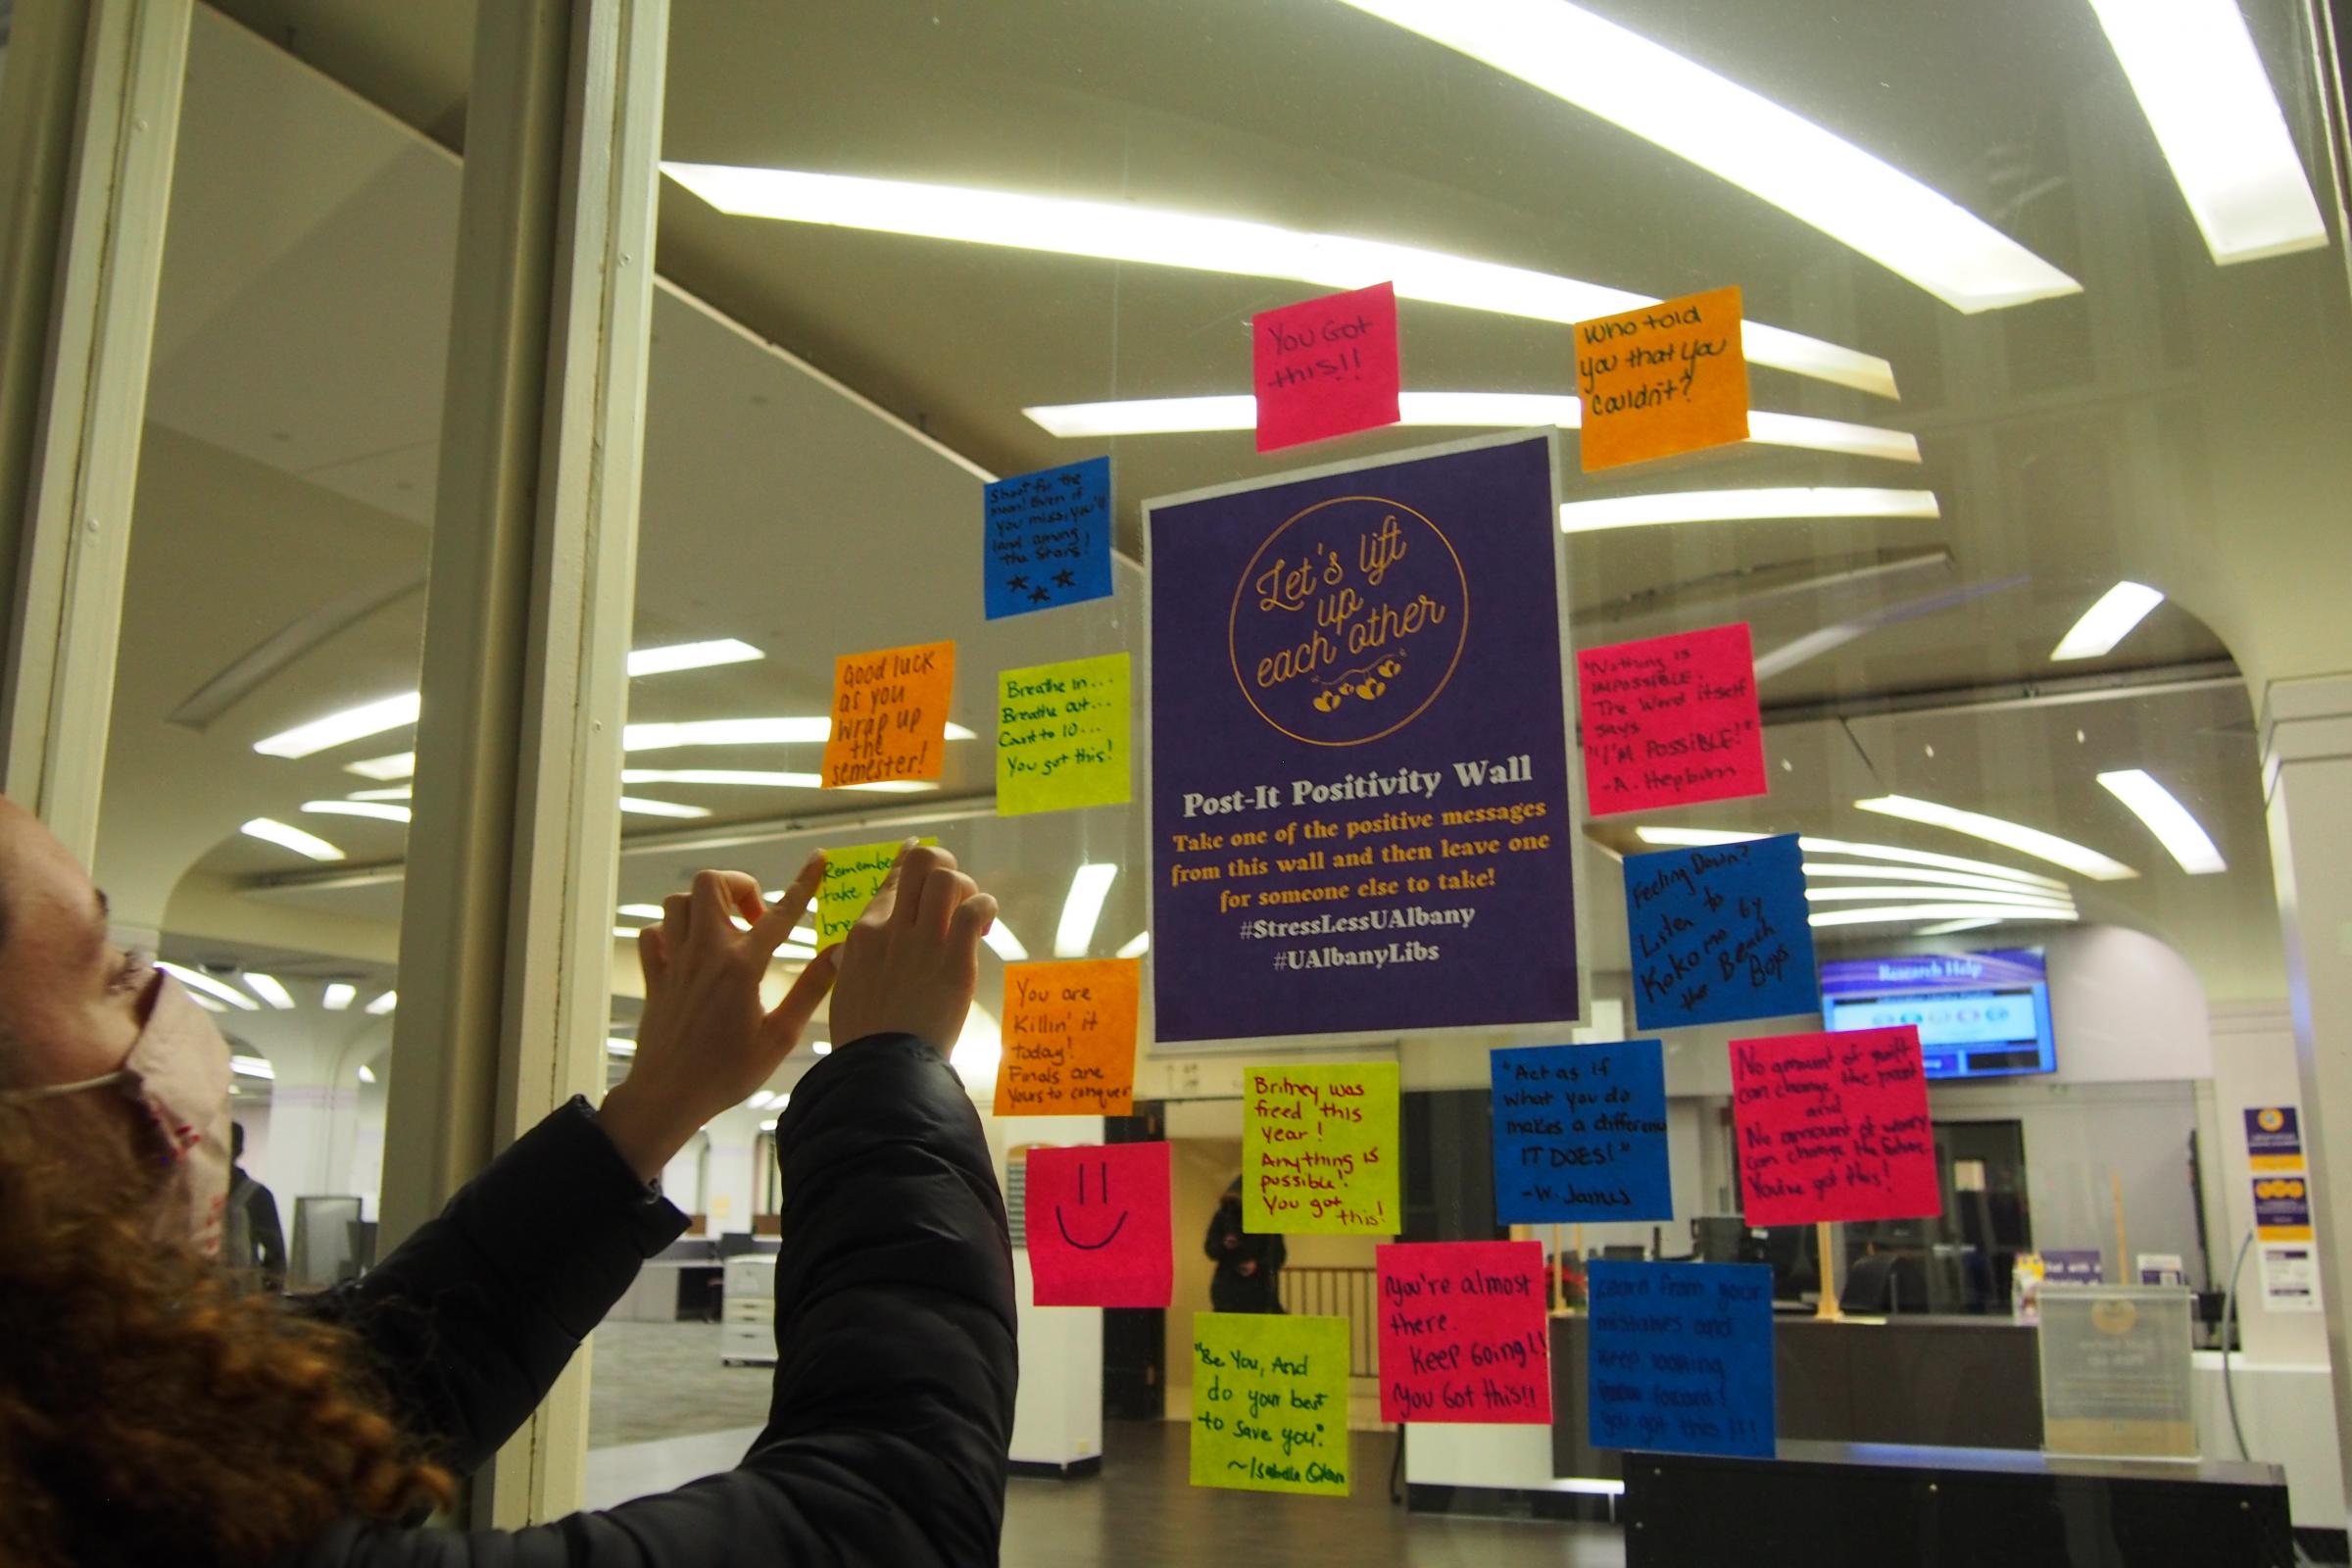 Student adds to the Post-it Positivity Wall